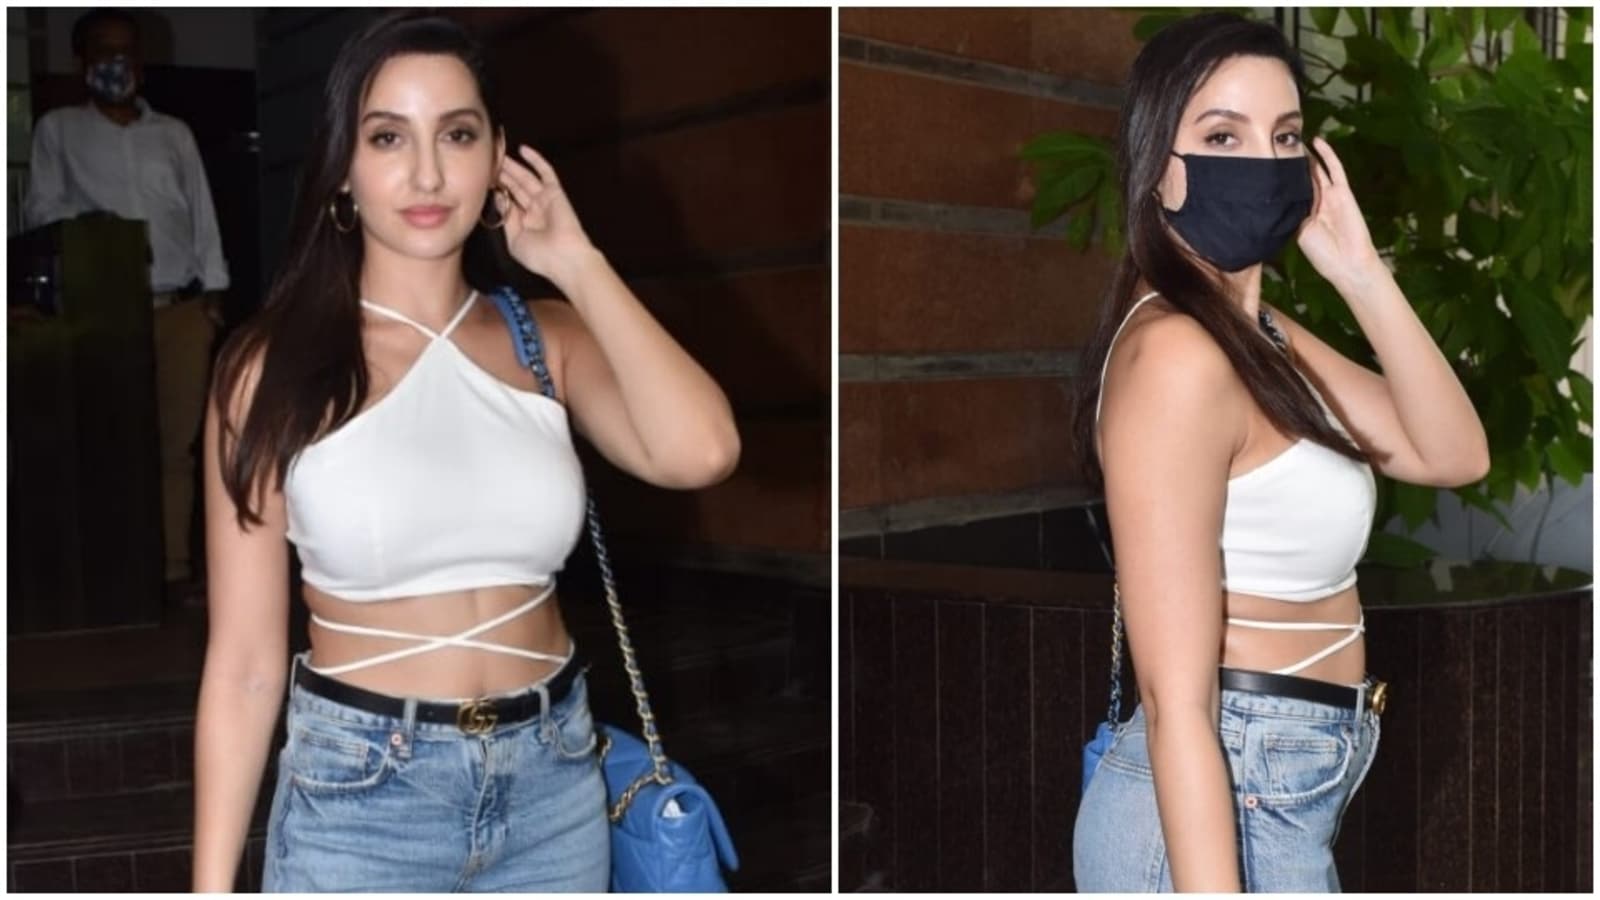 Nora Fatehi makes chic appearance carrying Chanel bag worth over Rs. 2.9  lakhs 2 : Bollywood News - Bollywood Hungama